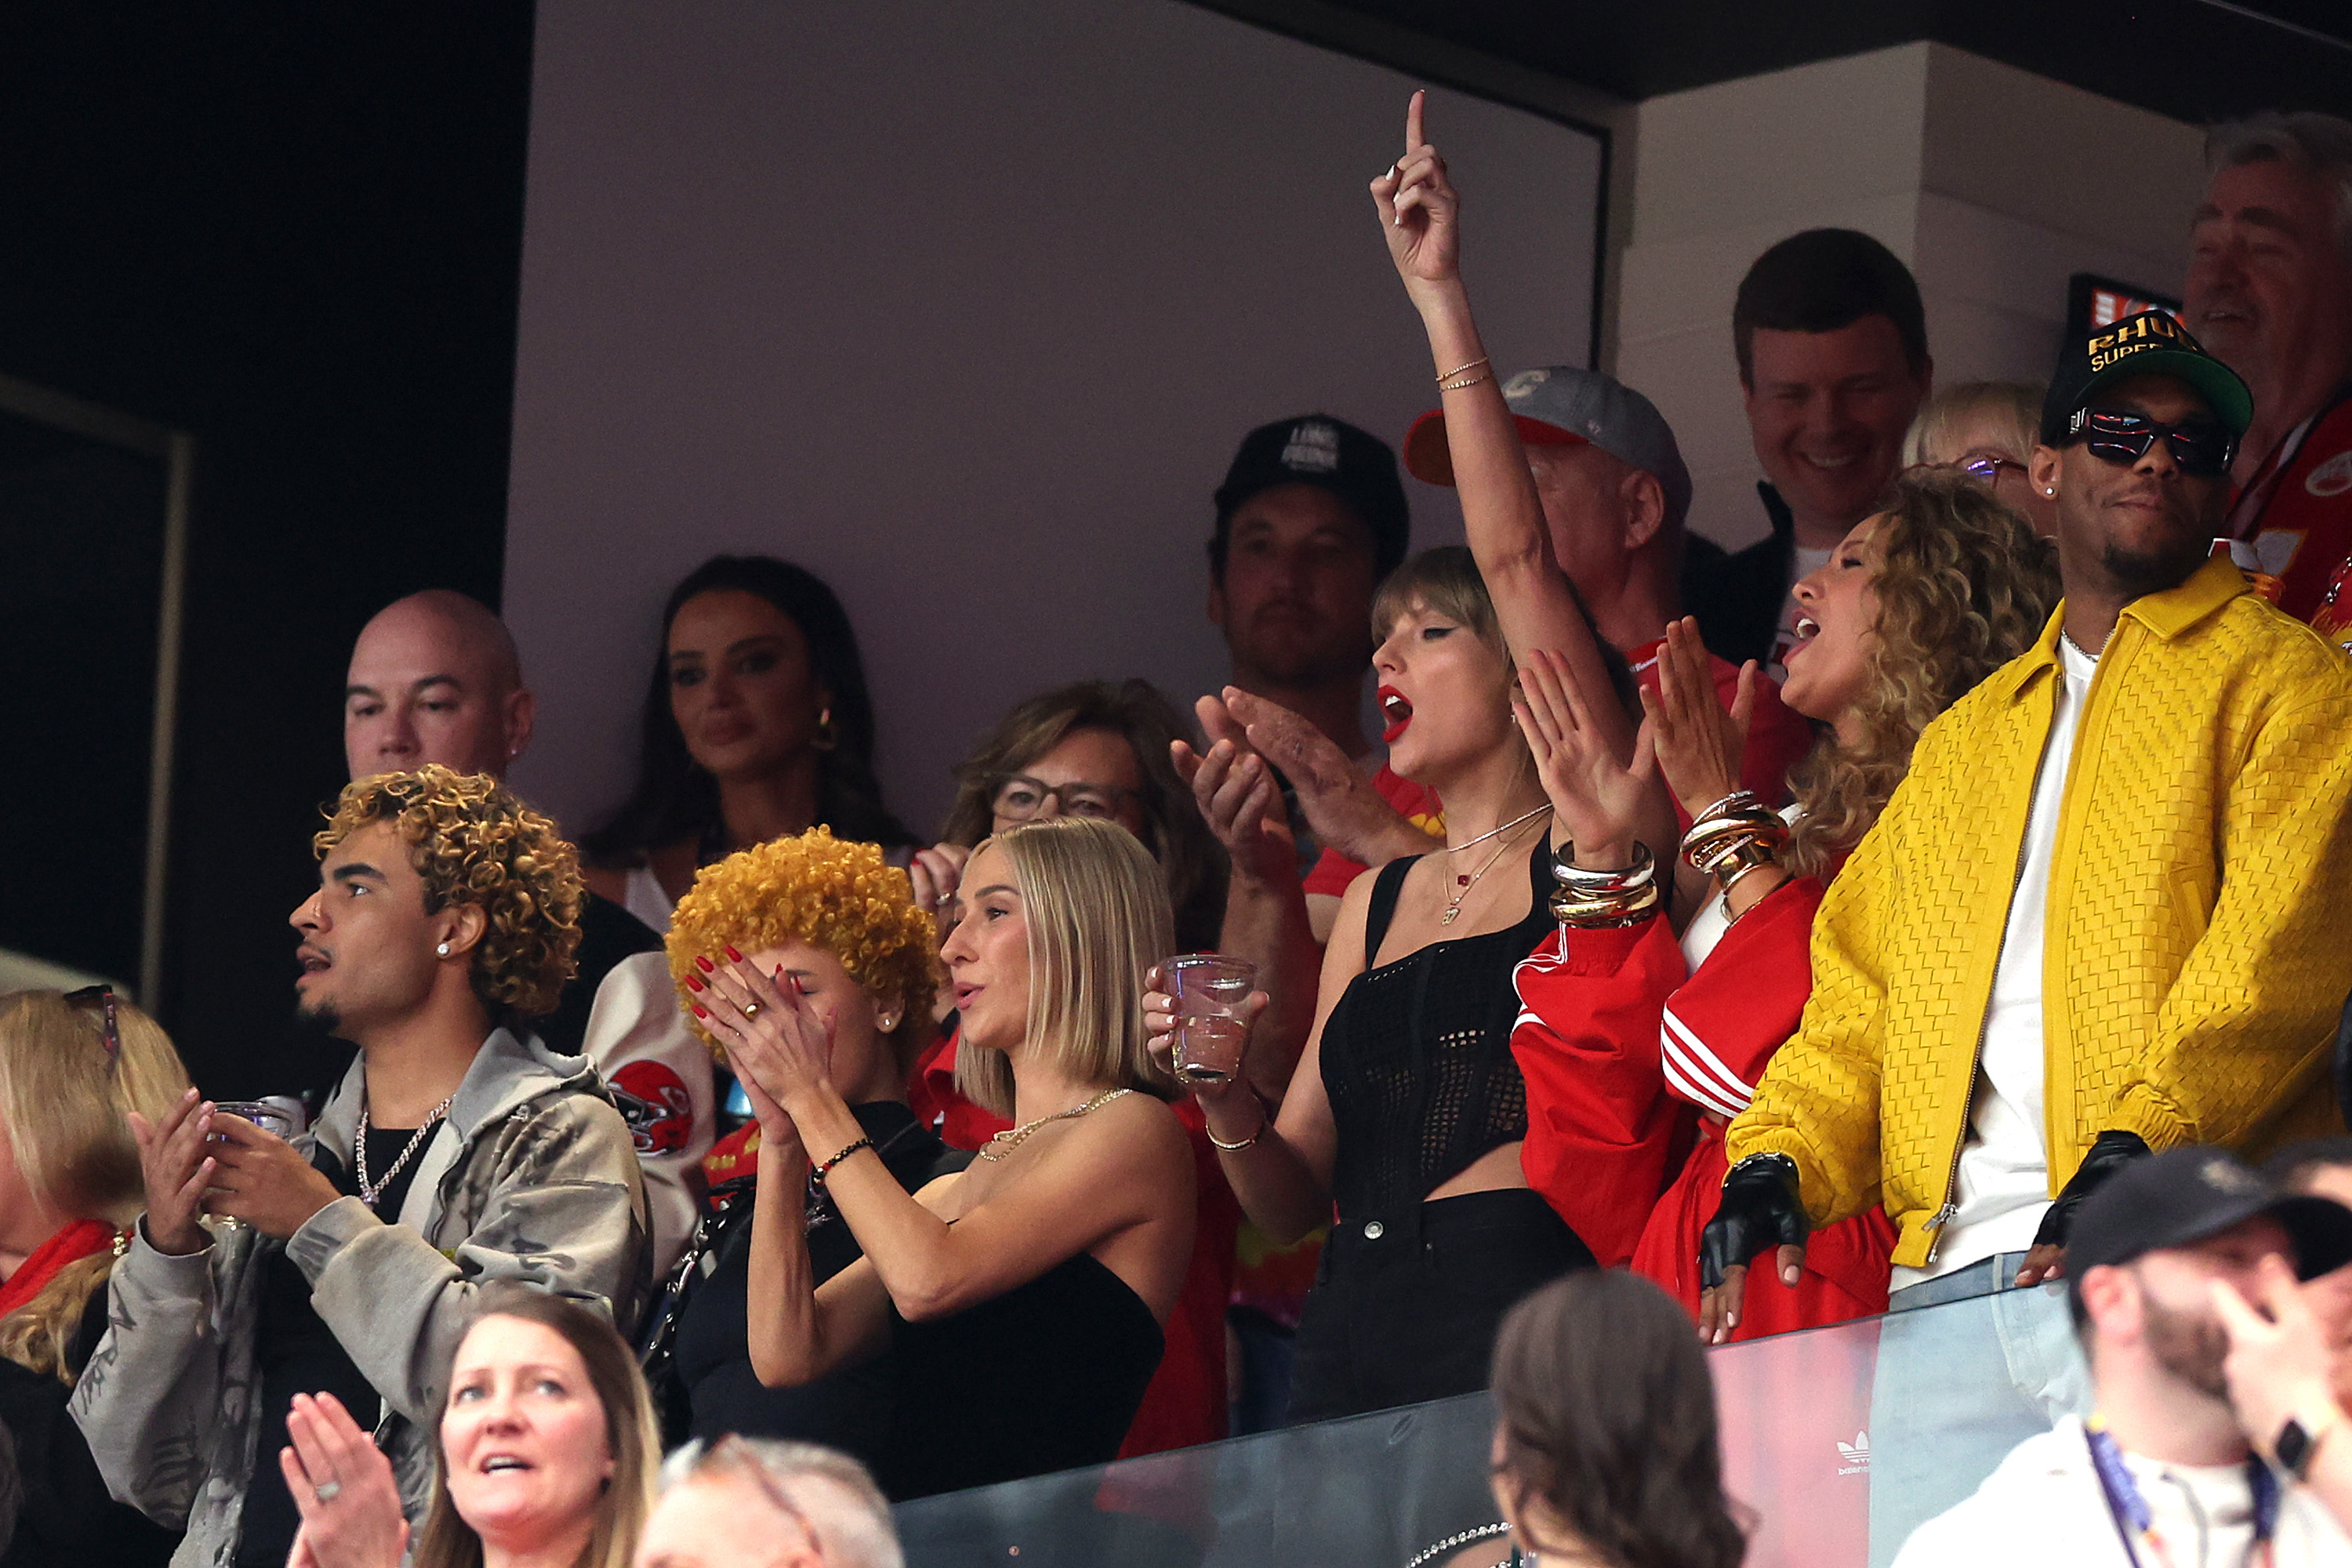 Group of people in a stadium box cheering, with Taylor pointing upward, expressions of excitement